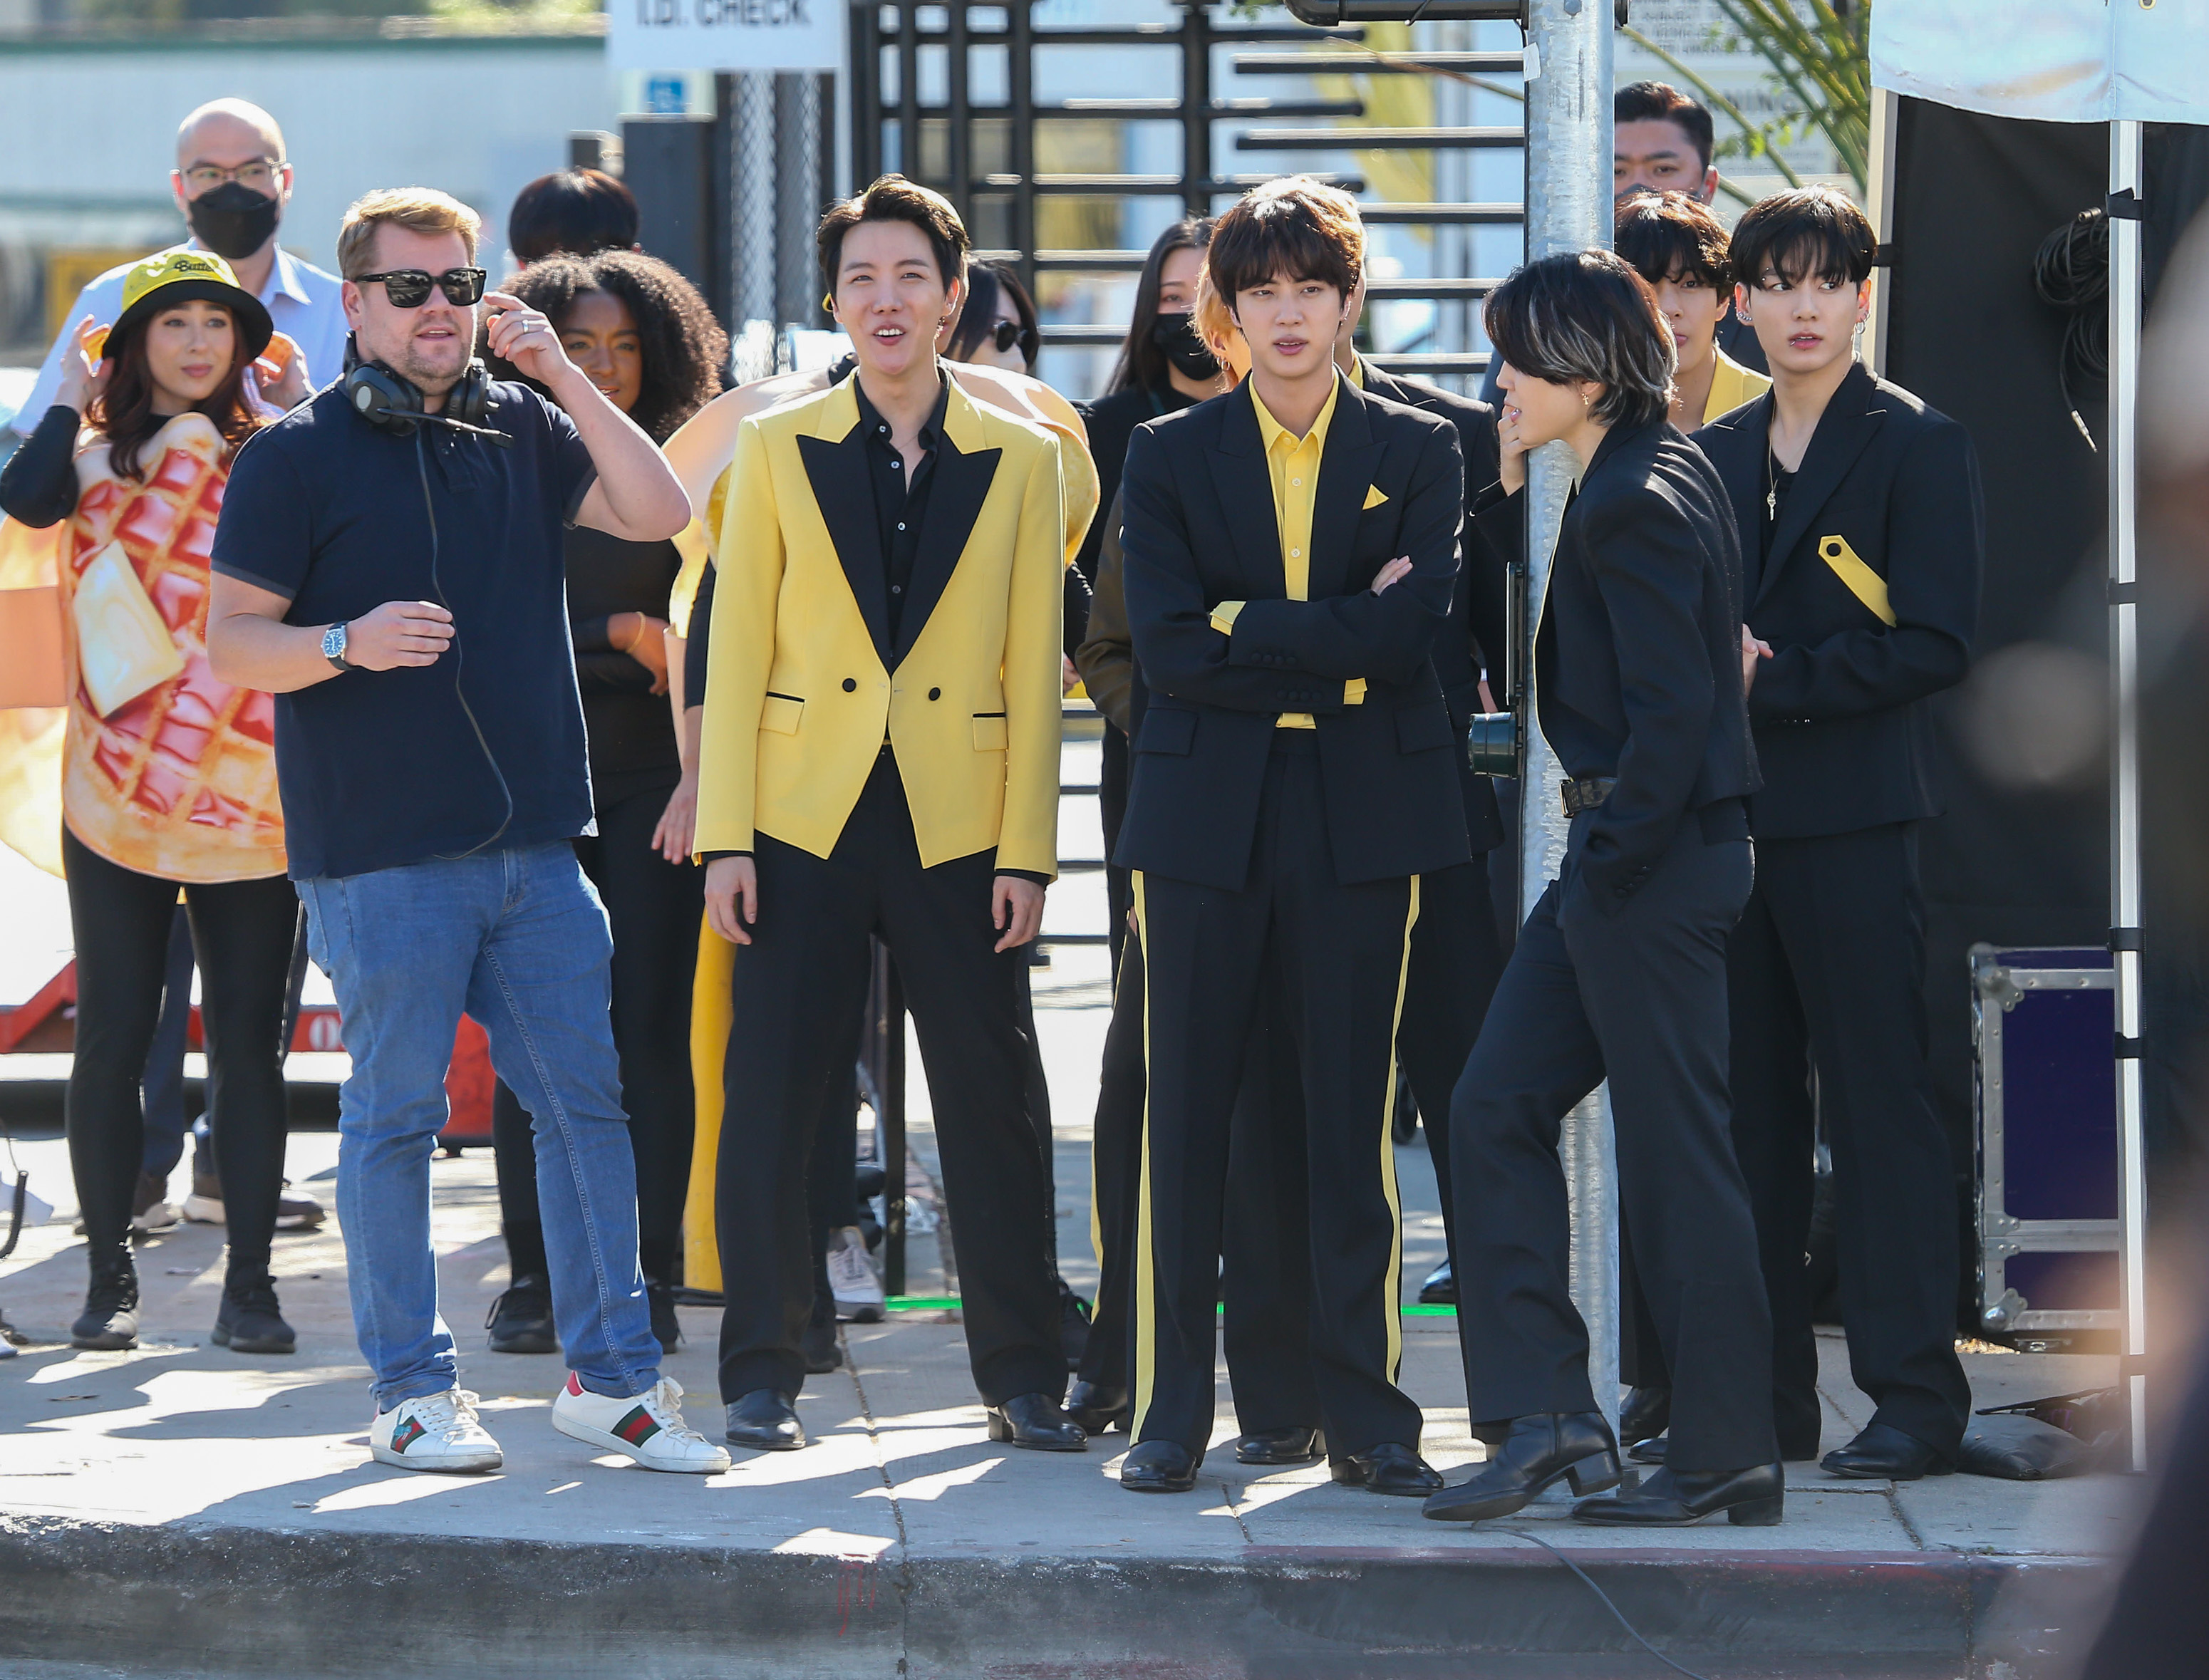 James Corden is seen with J-Hope, Jin, Jimin, V and Jungkook of the K-Pop band BTS filming for the 'The Late Late Show With James Corden'